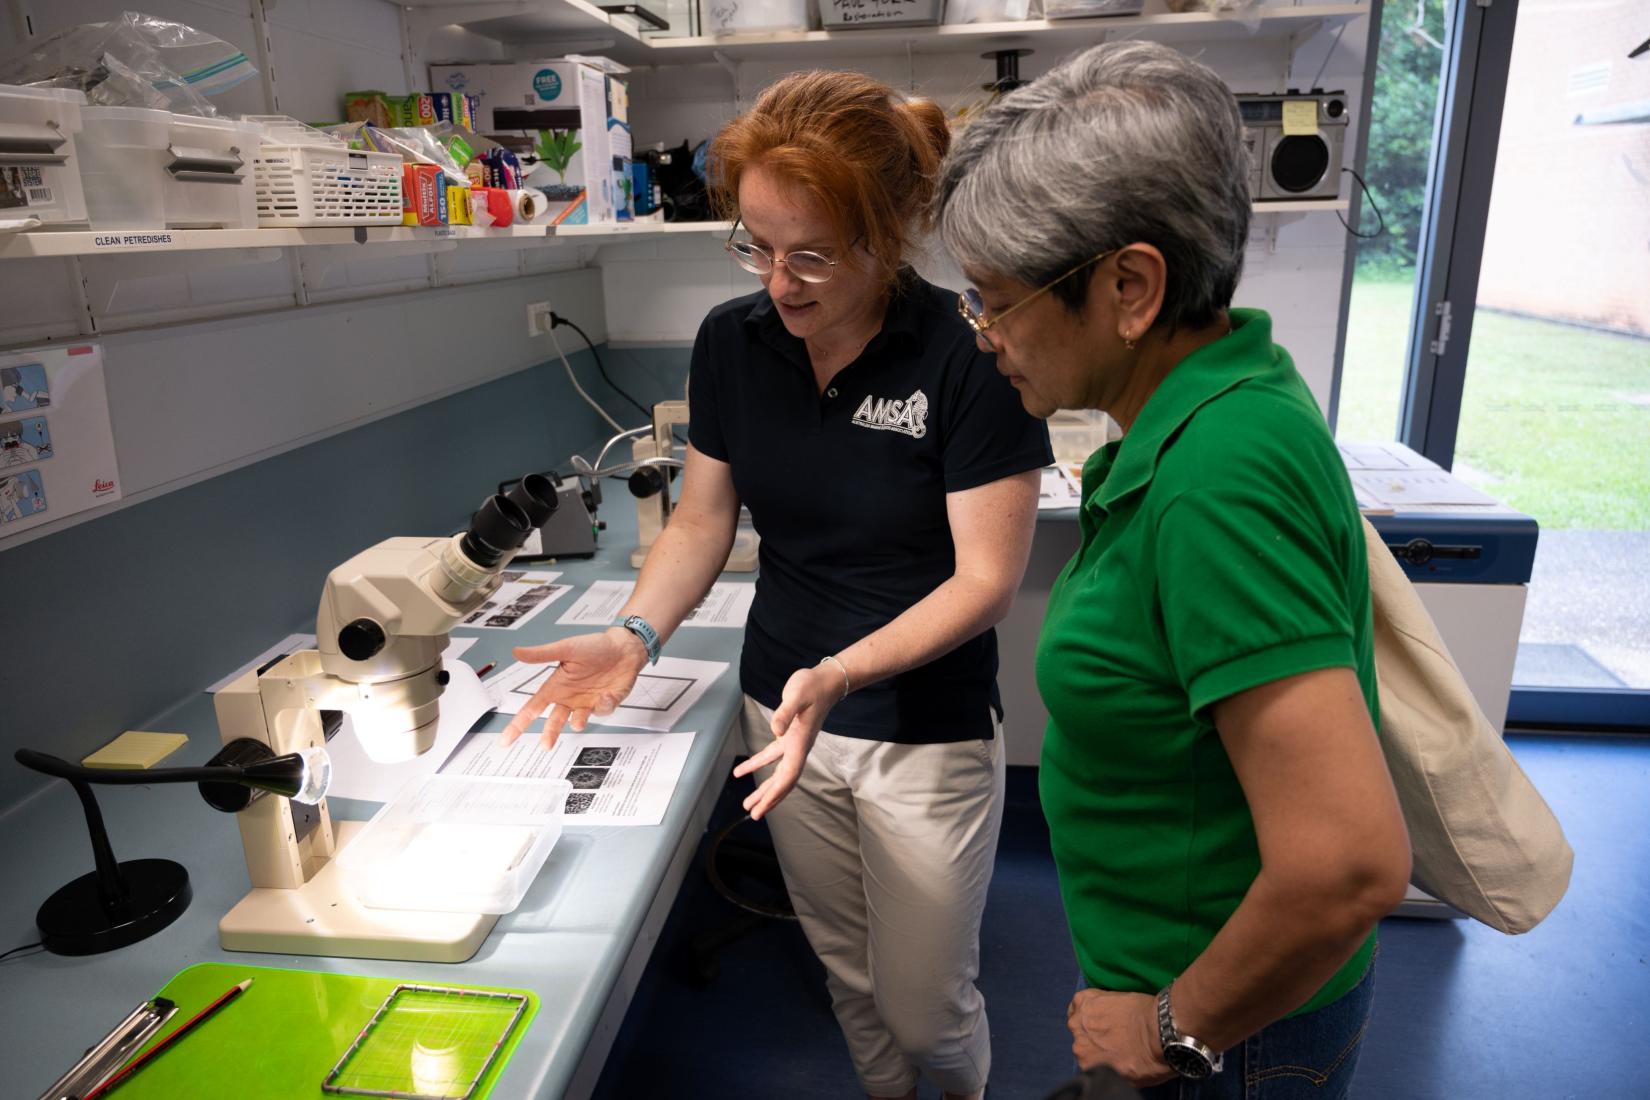 Researchers discussing samples sitting under a microscope in lab